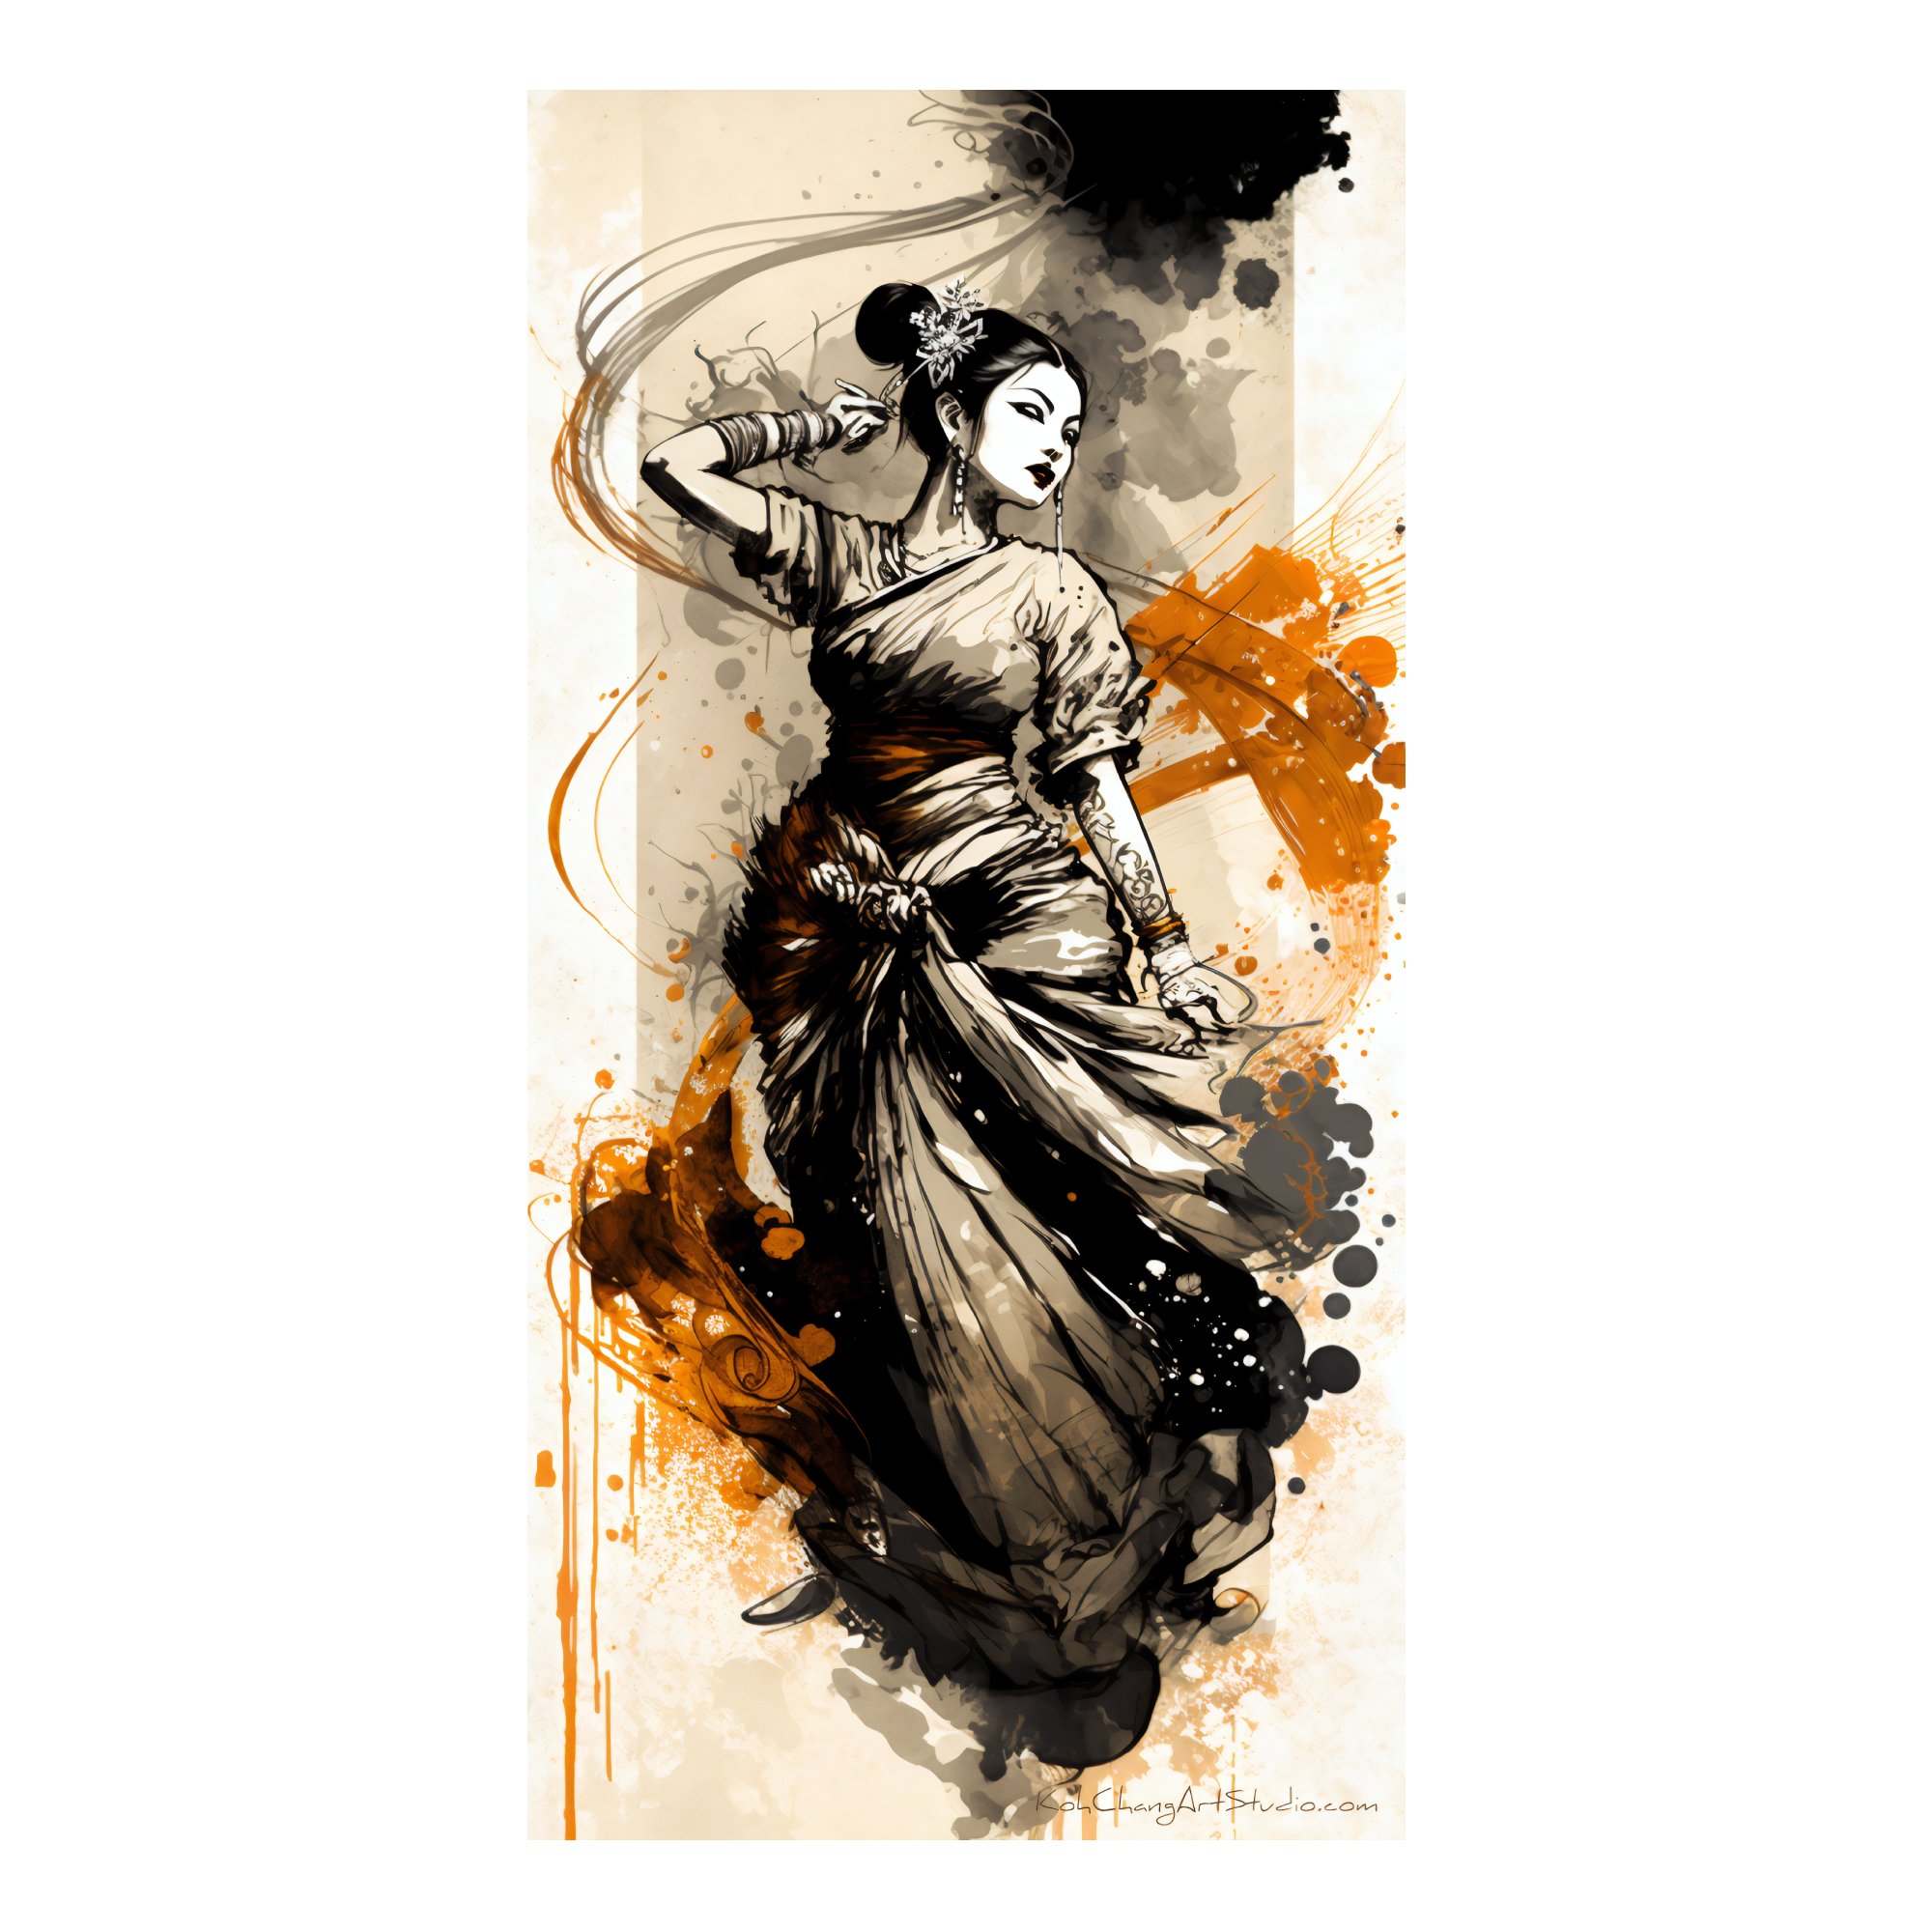 CHAIYADEE Art Design - Traditional Thai dancer lost in hypnotic thoughts and movement.